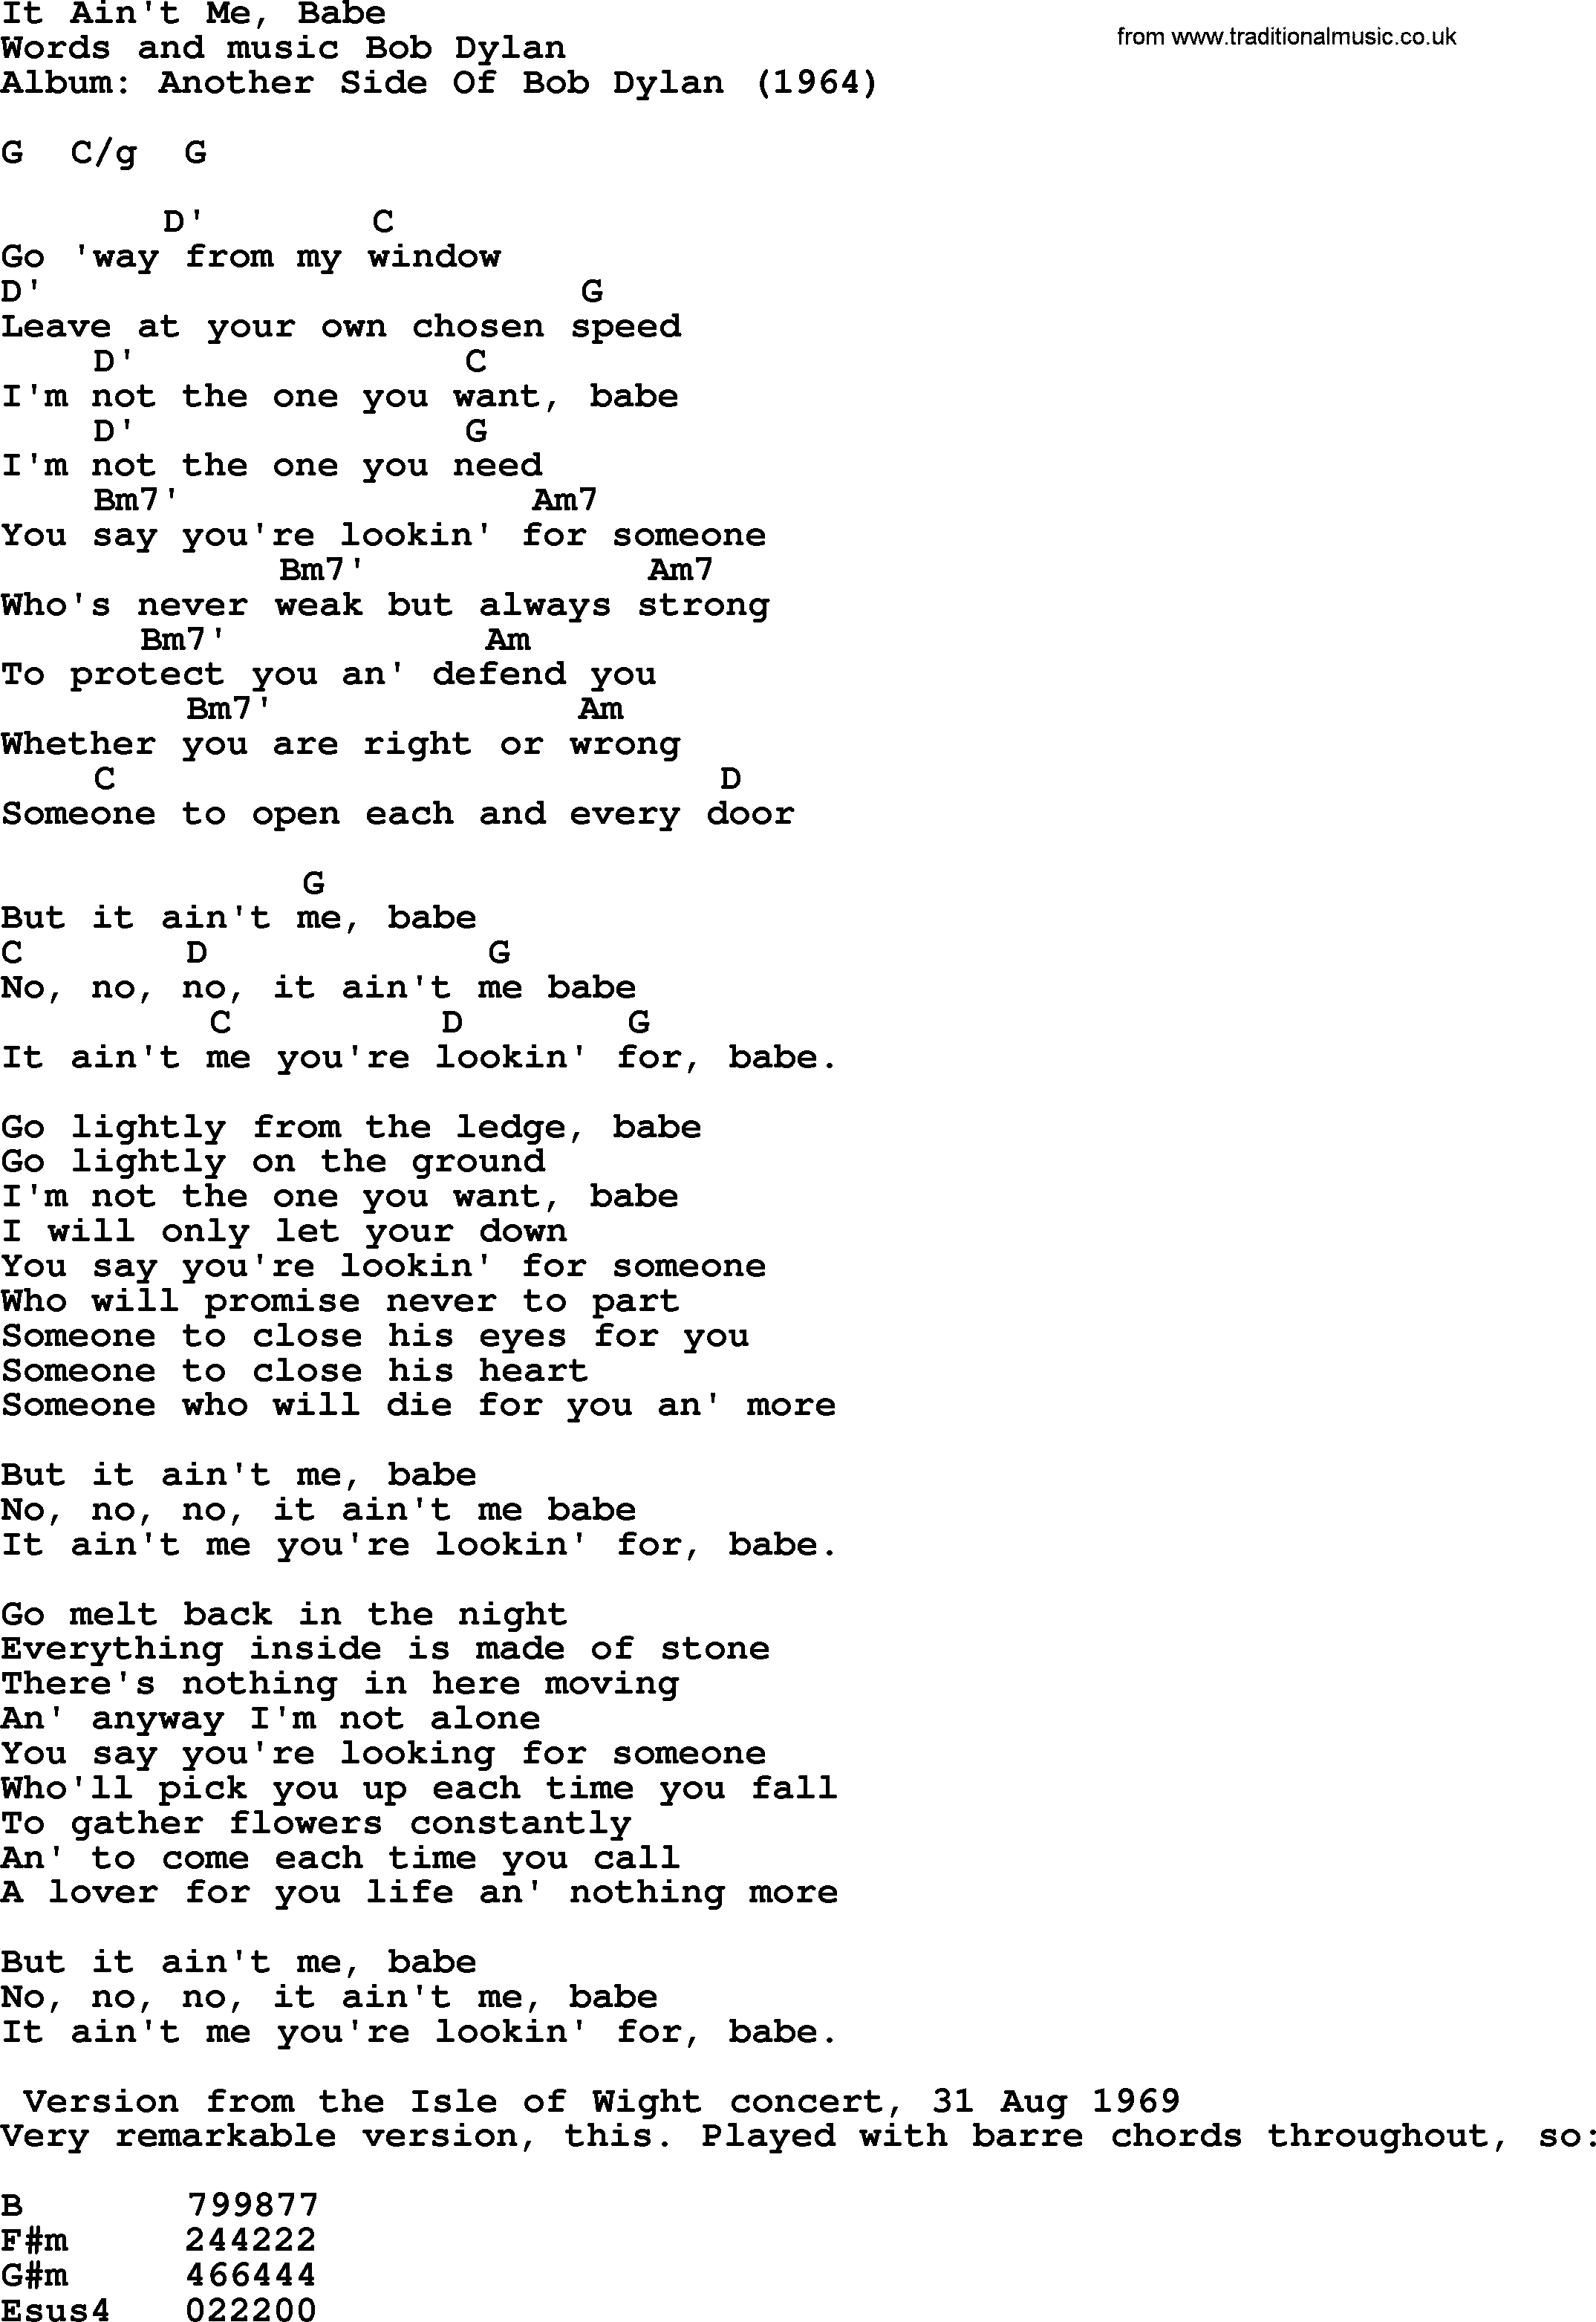 Bob Dylan song, lyrics with chords - It Ain't Me, Babe